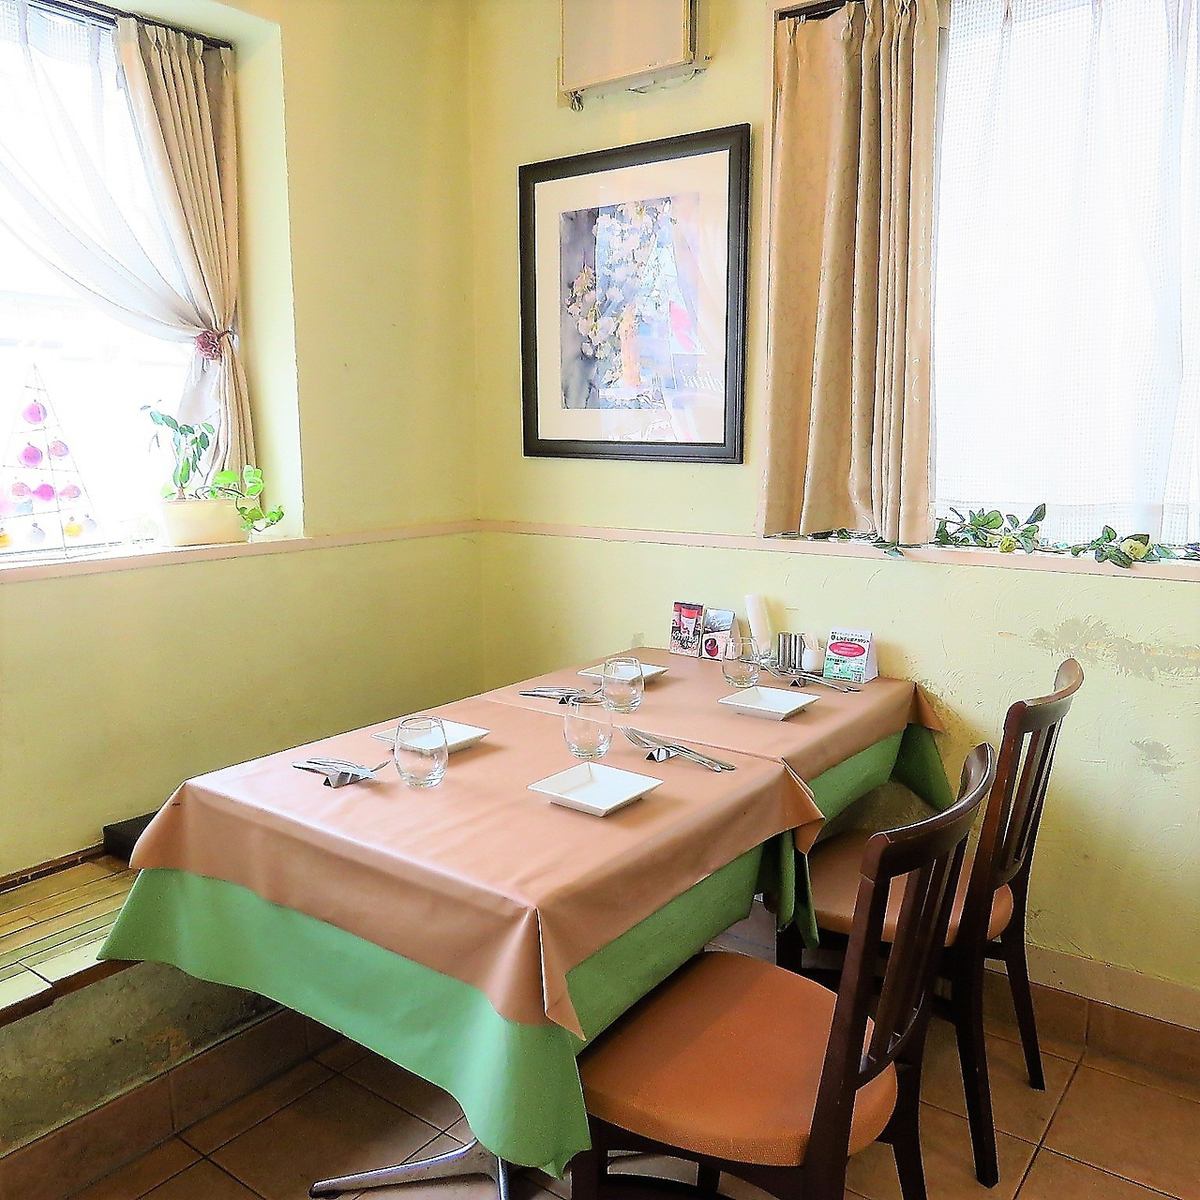 You can enjoy a relaxing meal in the calm atmosphere of the restaurant.